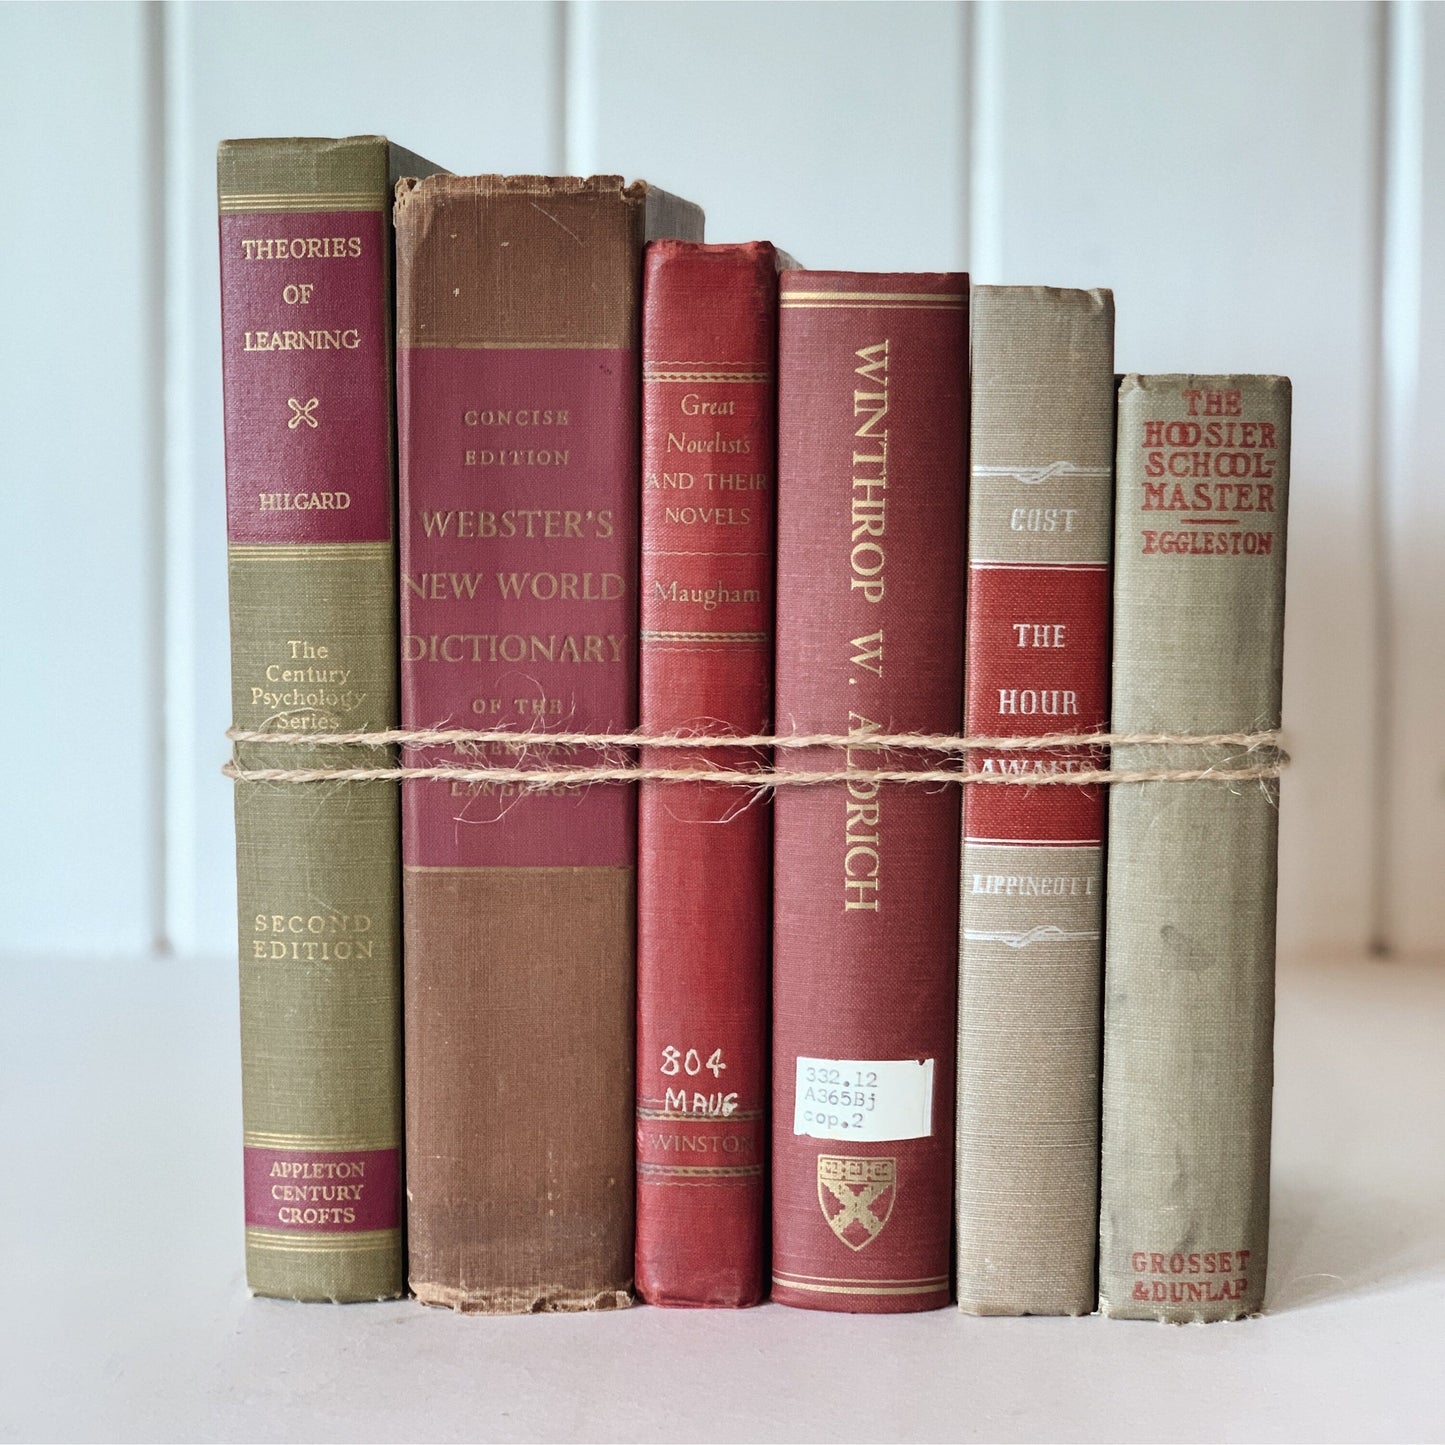 Vintage Mauve, Maroon Red, and Tan Mid Century Modern Masculine Books for Shelf Styling